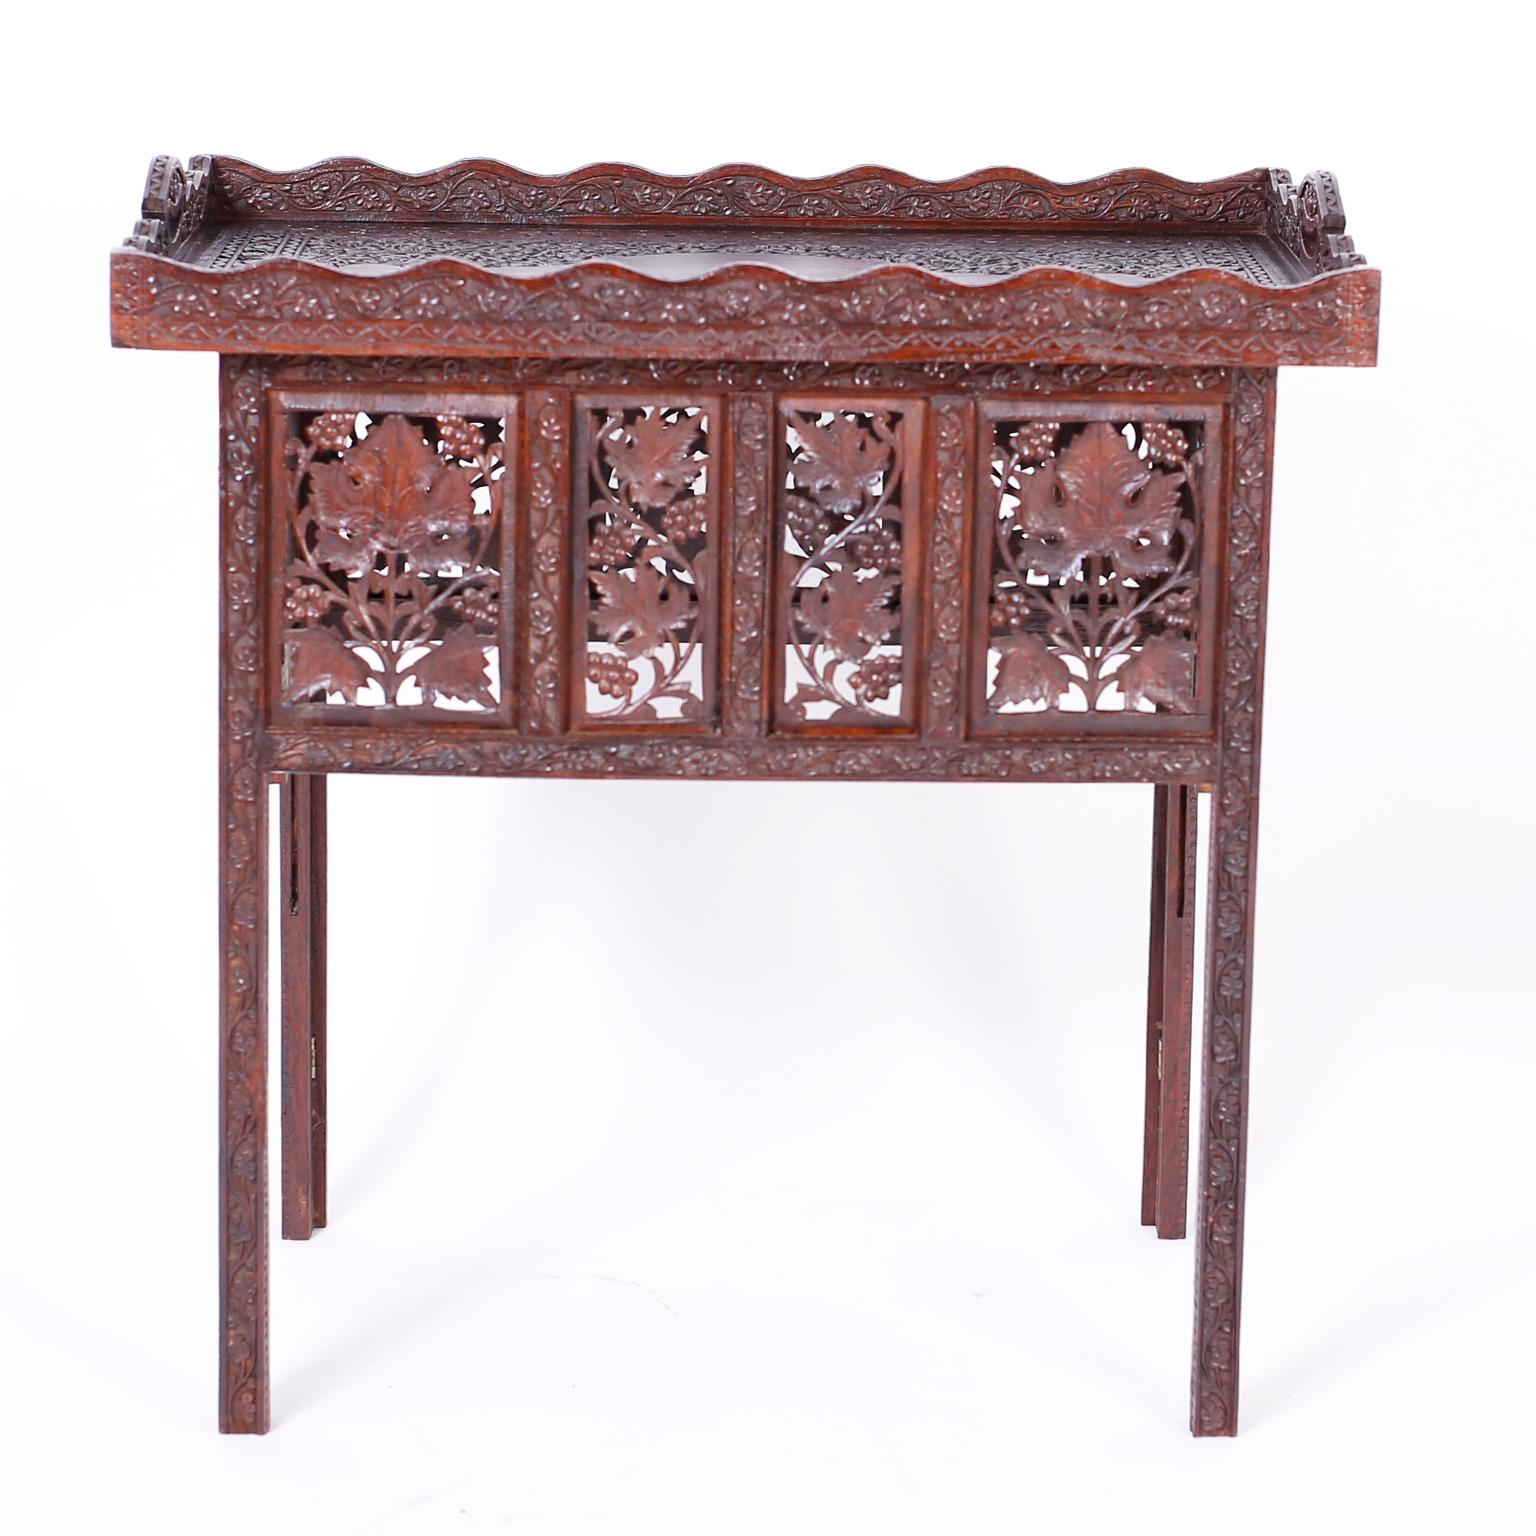 Anglo Indian table crafted in mahogany with a removable serving tray ambitiously carved with floral designs and a base with carved leafy panels of open fretwork on elegant carved legs.